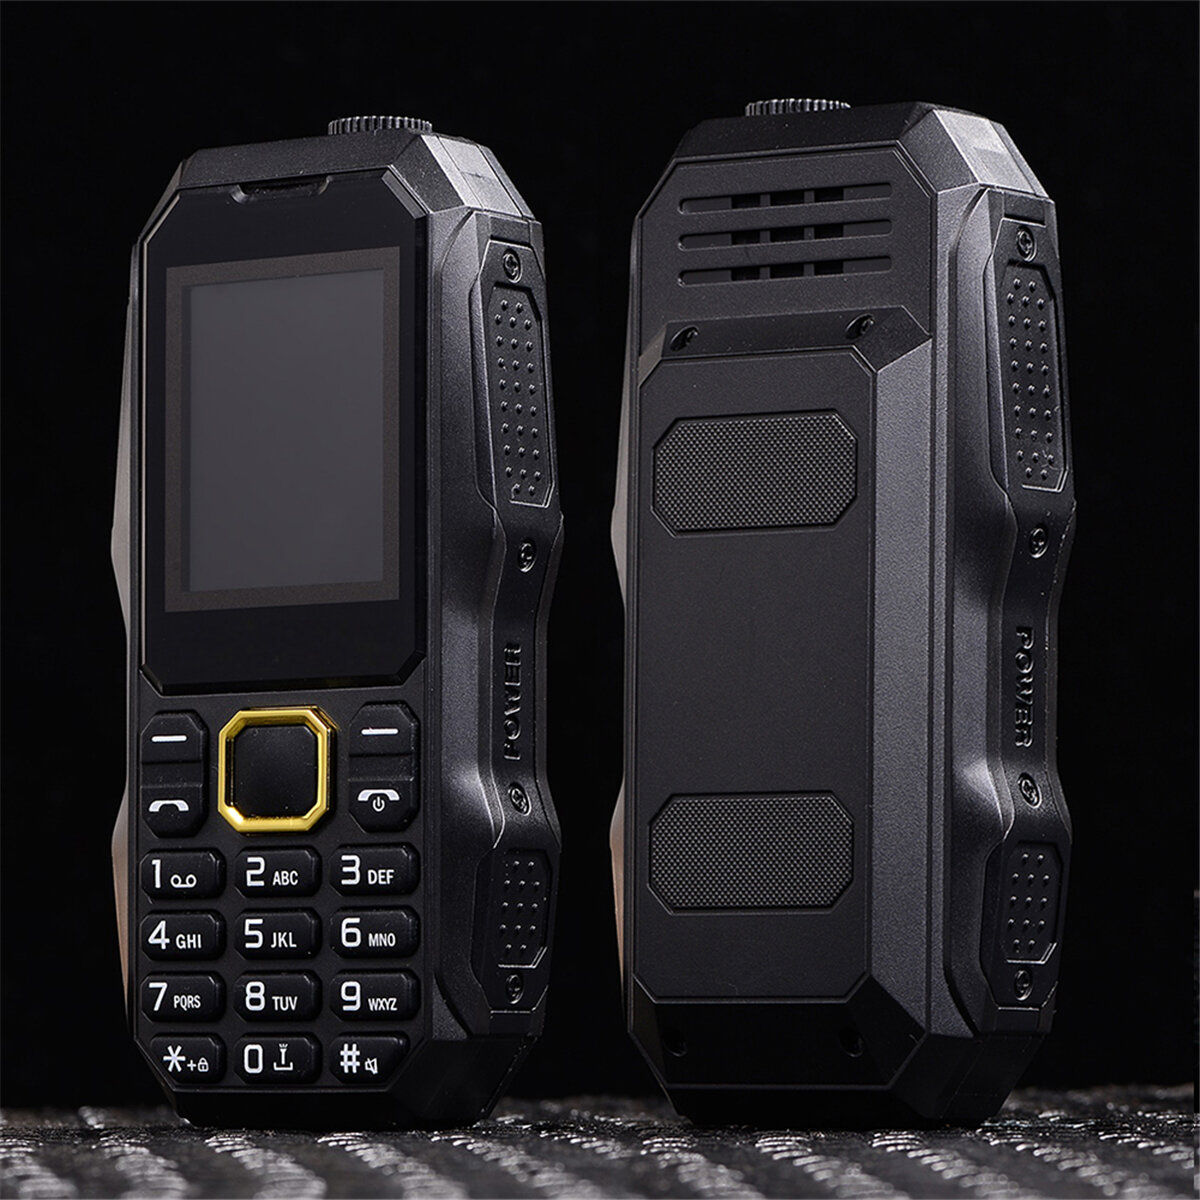 

W2025 Rugged Feature Phone Dual SIM 32MB+32MB bluetooth Torch Big Speaker Long Stand-by 2.0 inch 5800mAH